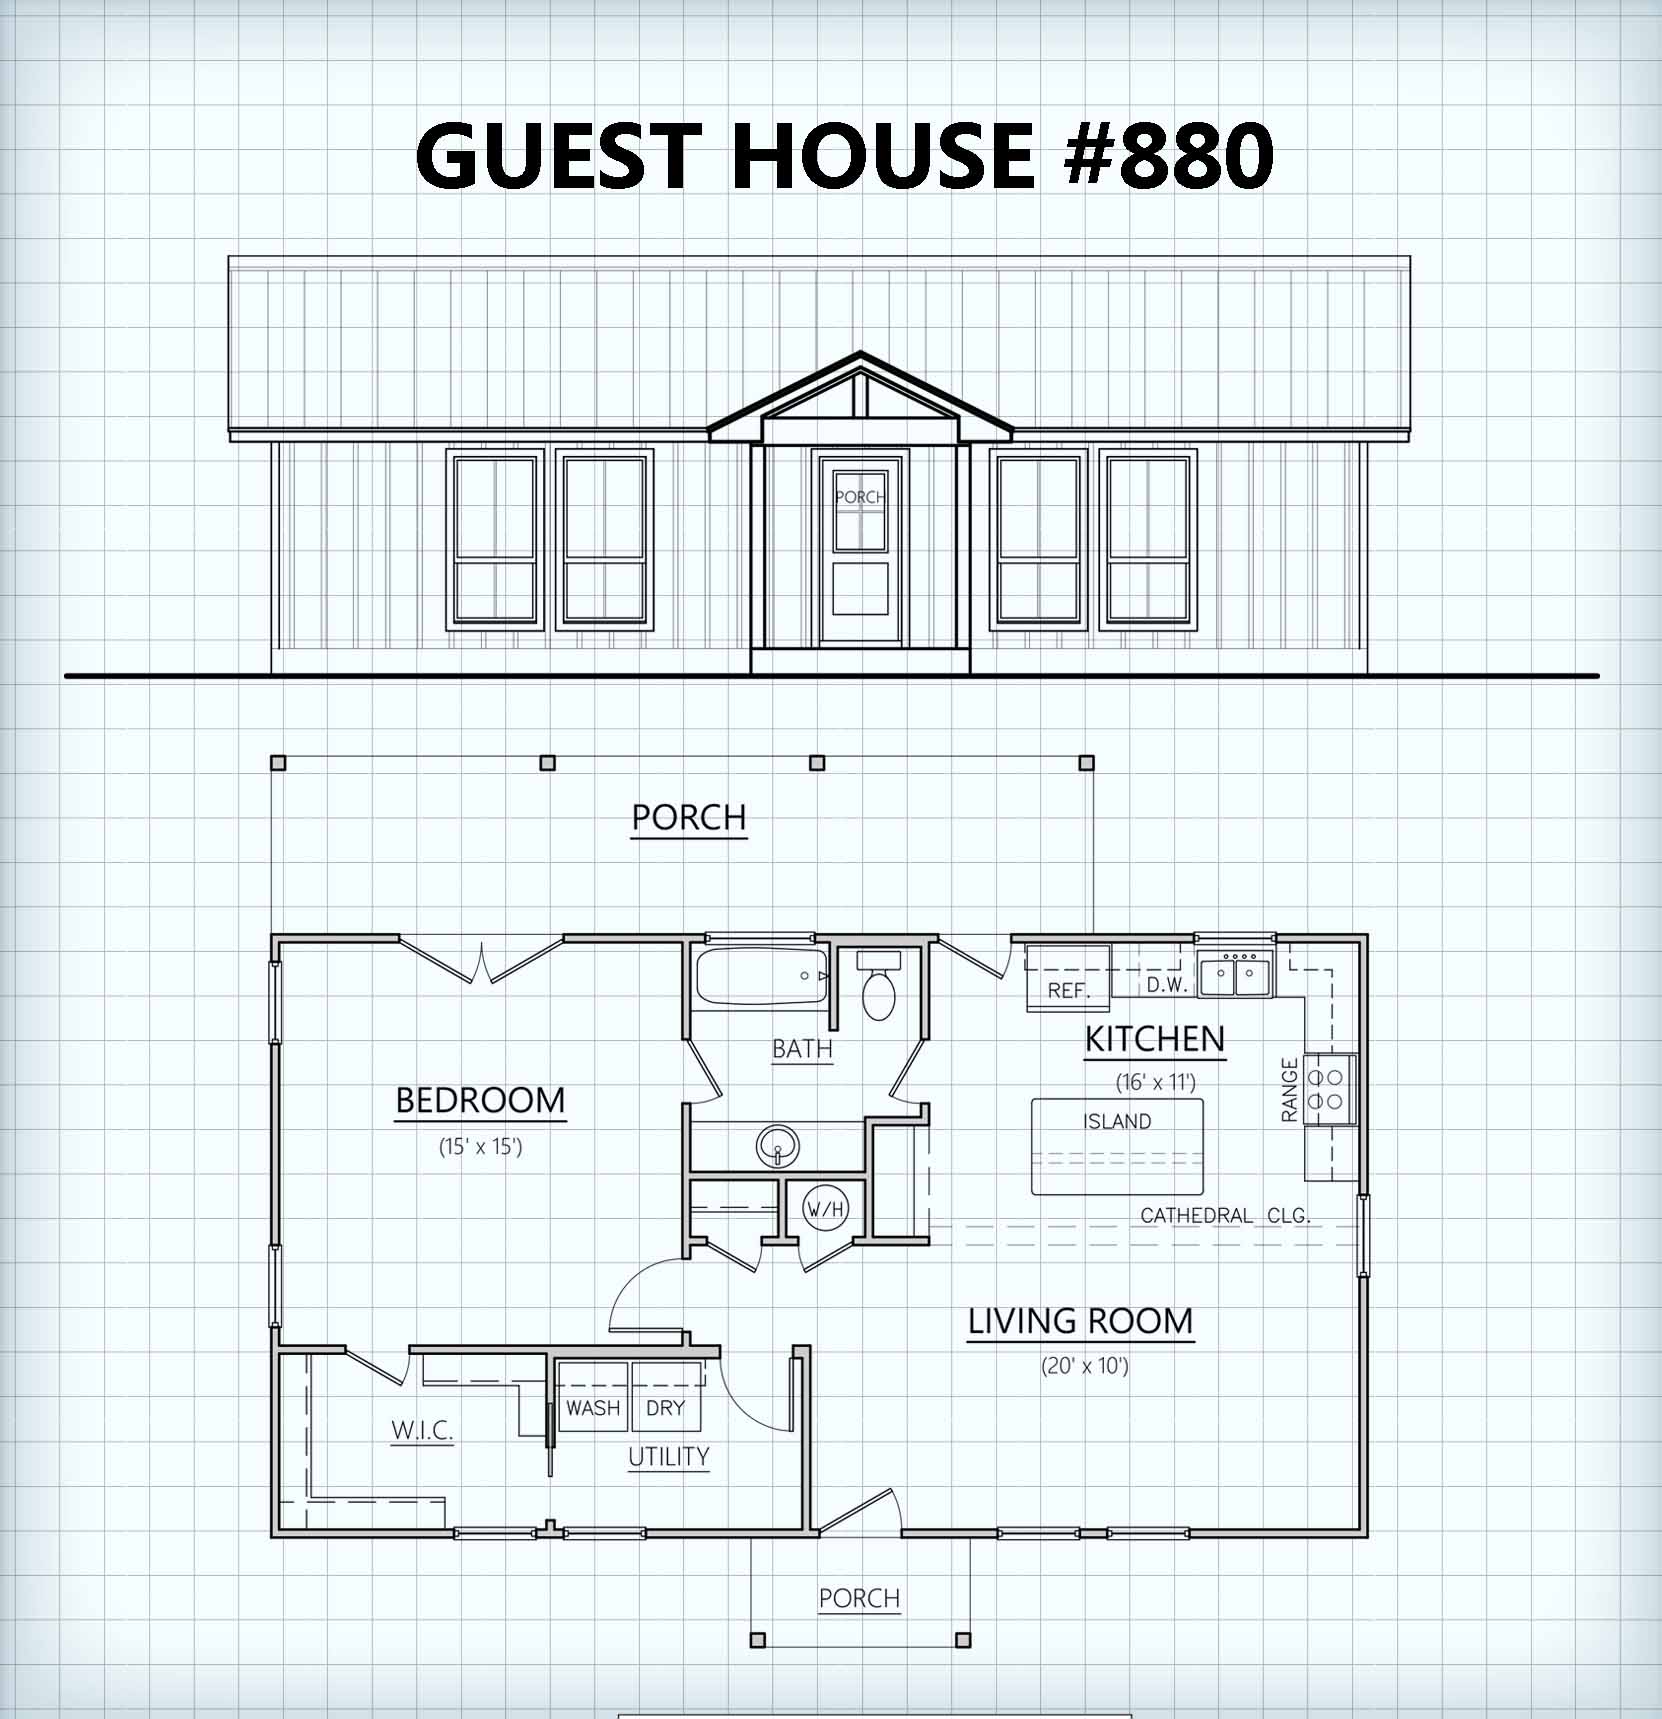 Guest House #880